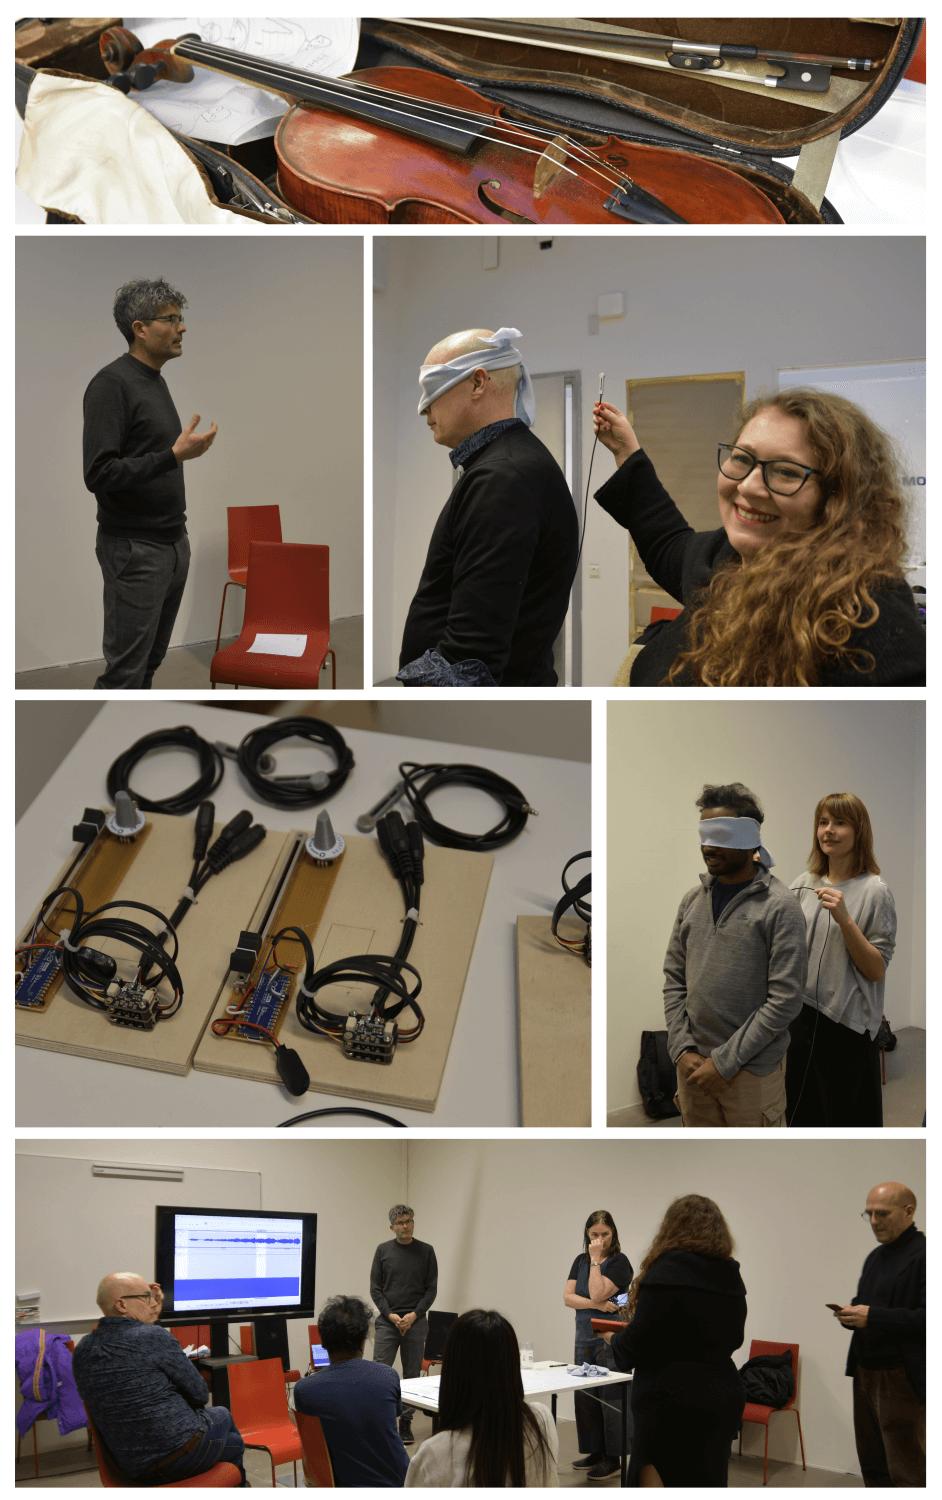 Images from the workshop "Shared sensations from complementary music and vibrotactile compositions".